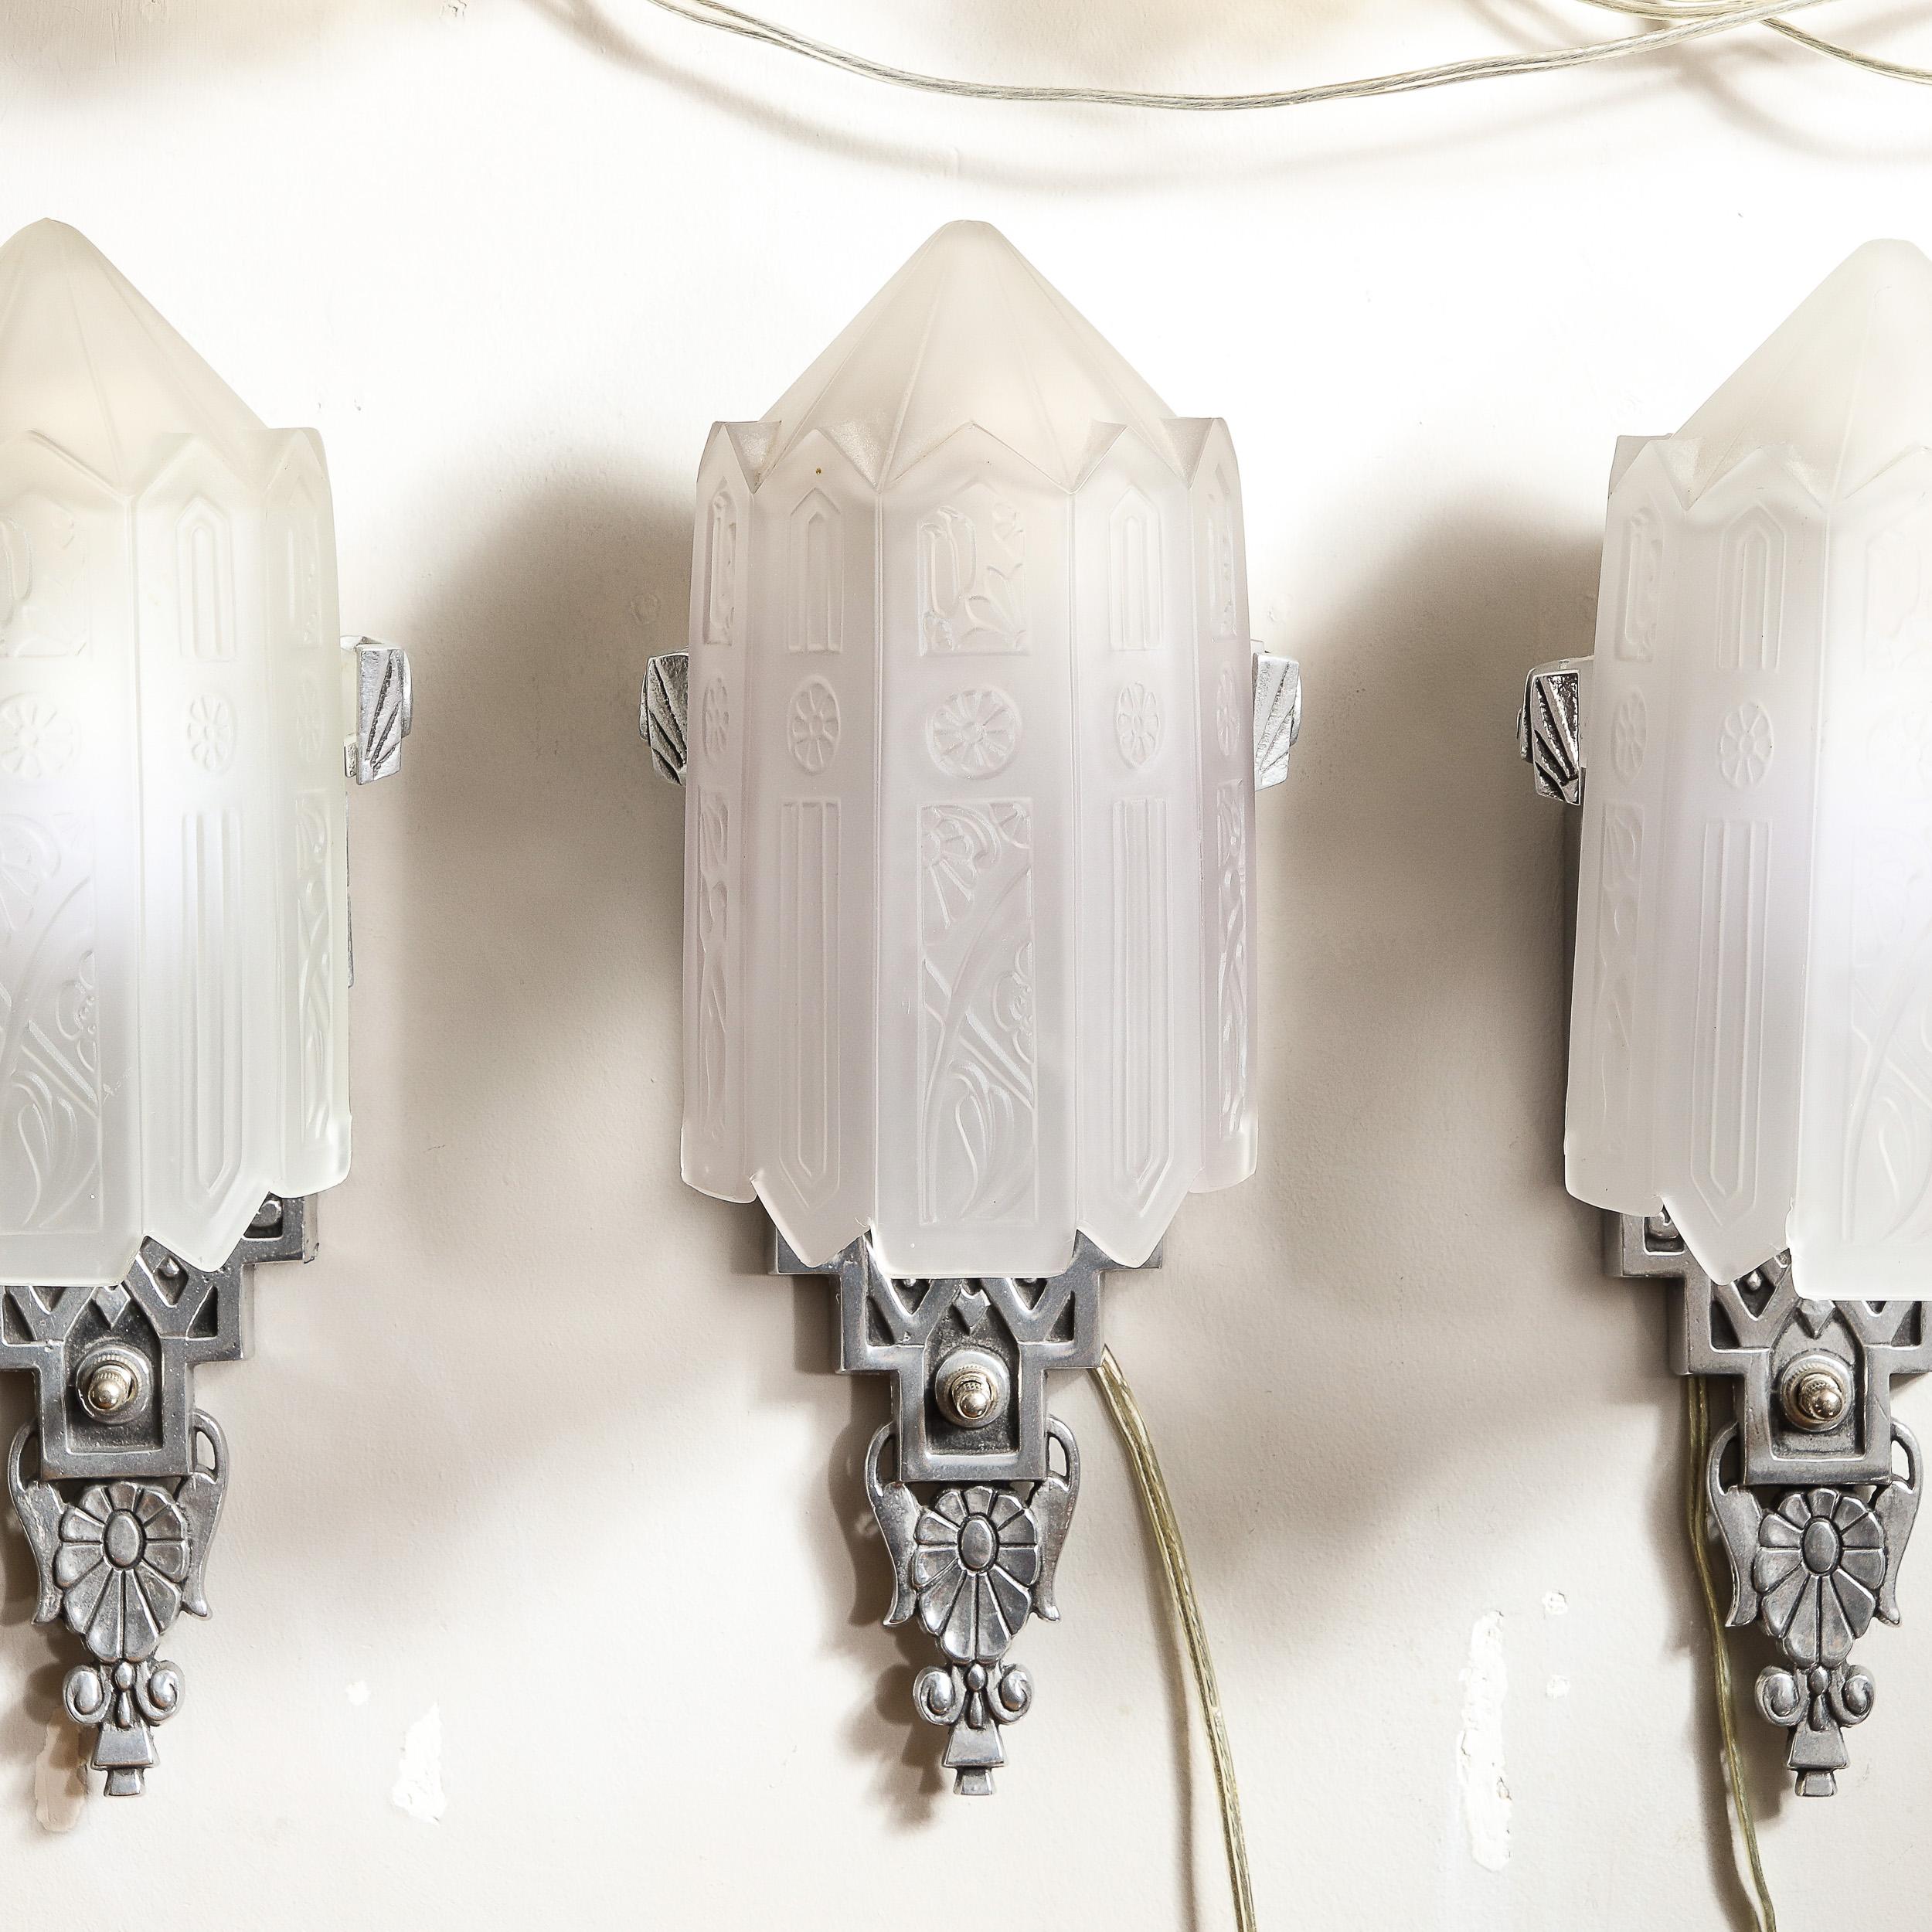 This stunning set of three Art Deco sconces were realized in the United States circa 1930. They feature skyscraper style bases in forged aluminum features scroll form detailing bookending a stacked totemic form below an abstracted striated ovoid